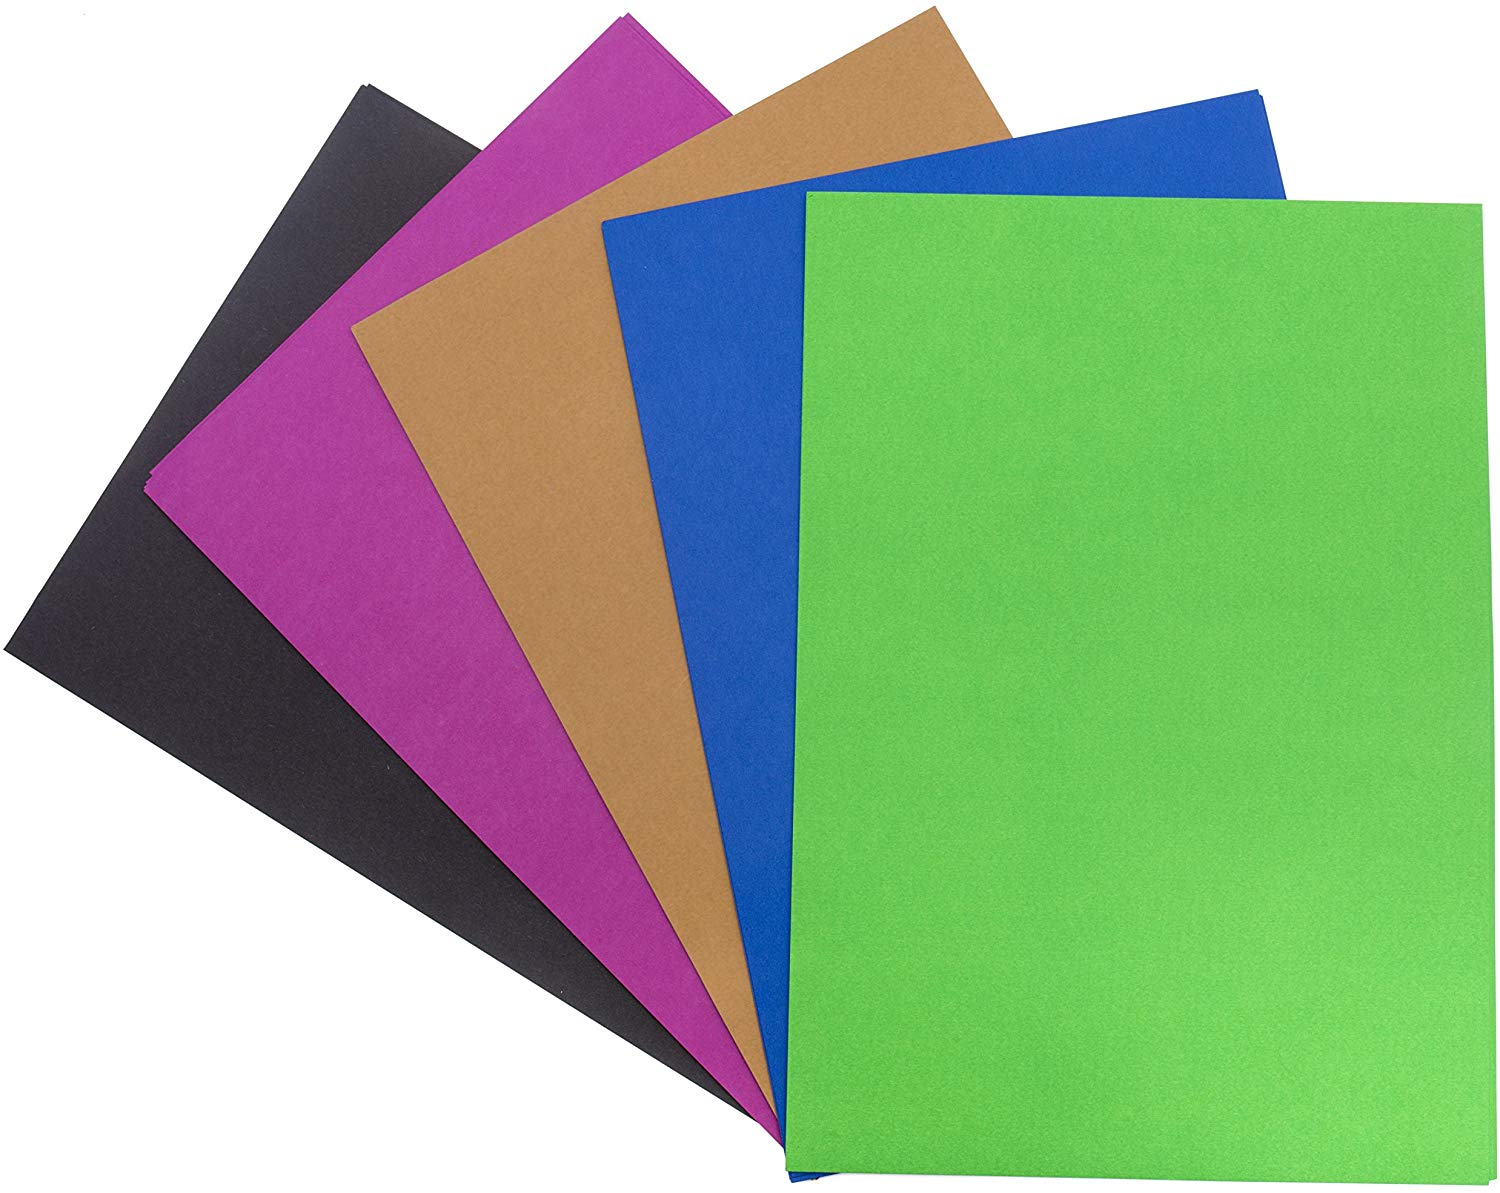 8.5 inch x 11 inch Color Paper,Cool 5-Color Assortment 24 lb/ 89 GSM Multi Colored 500 Sheets 